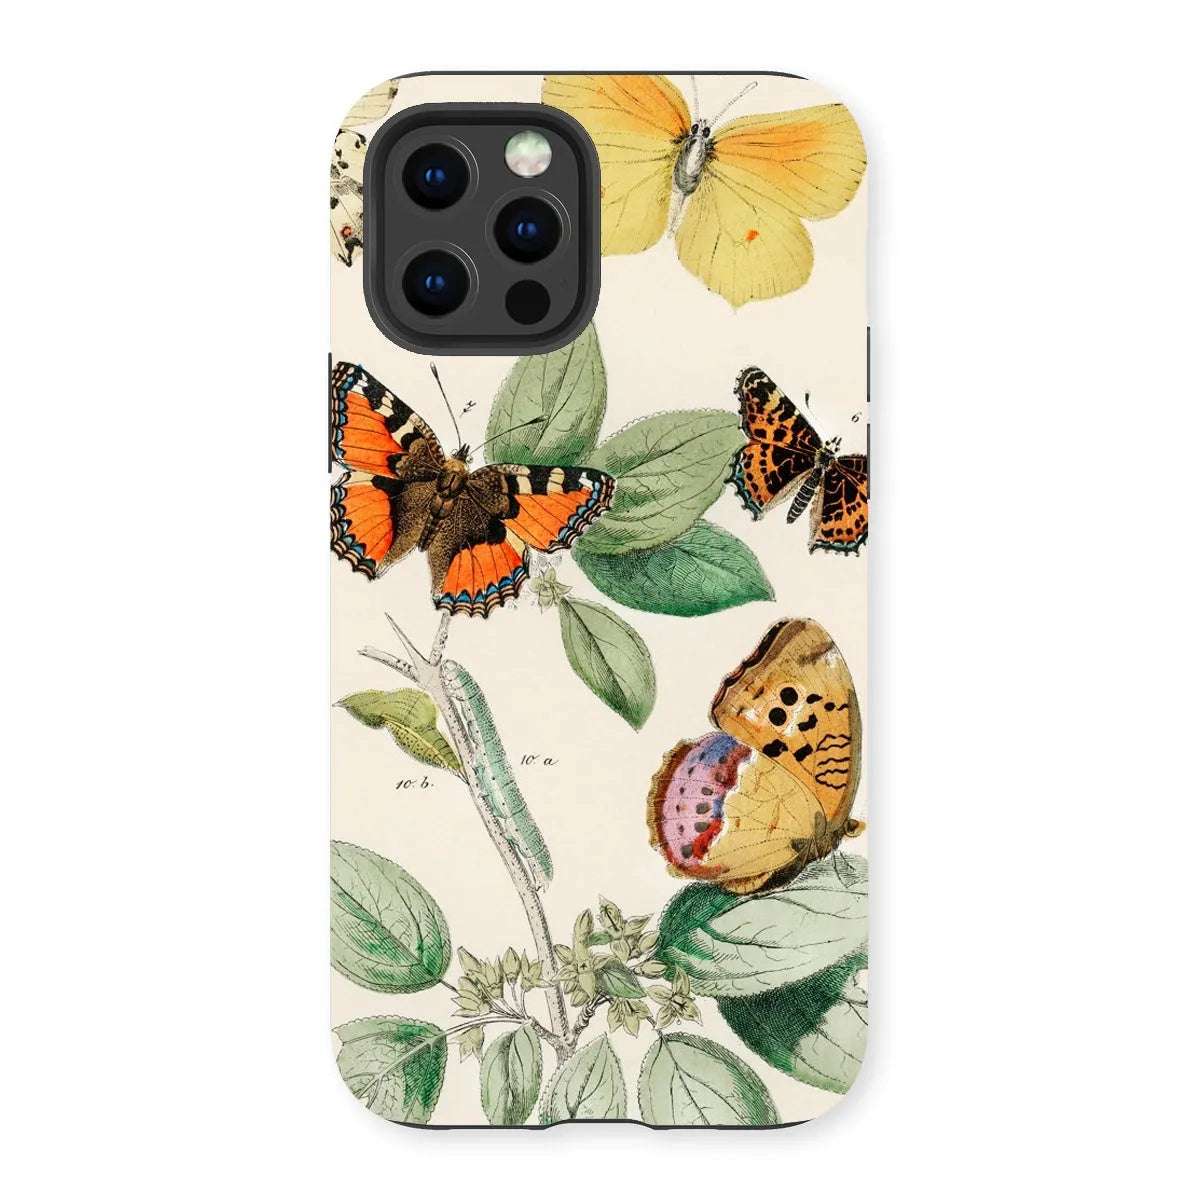 Butterfly Aesthetic Art Phone Case - William Forsell Kirby - Iphone 13 Pro / Matte - Mobile Phone Cases - Aesthetic Art